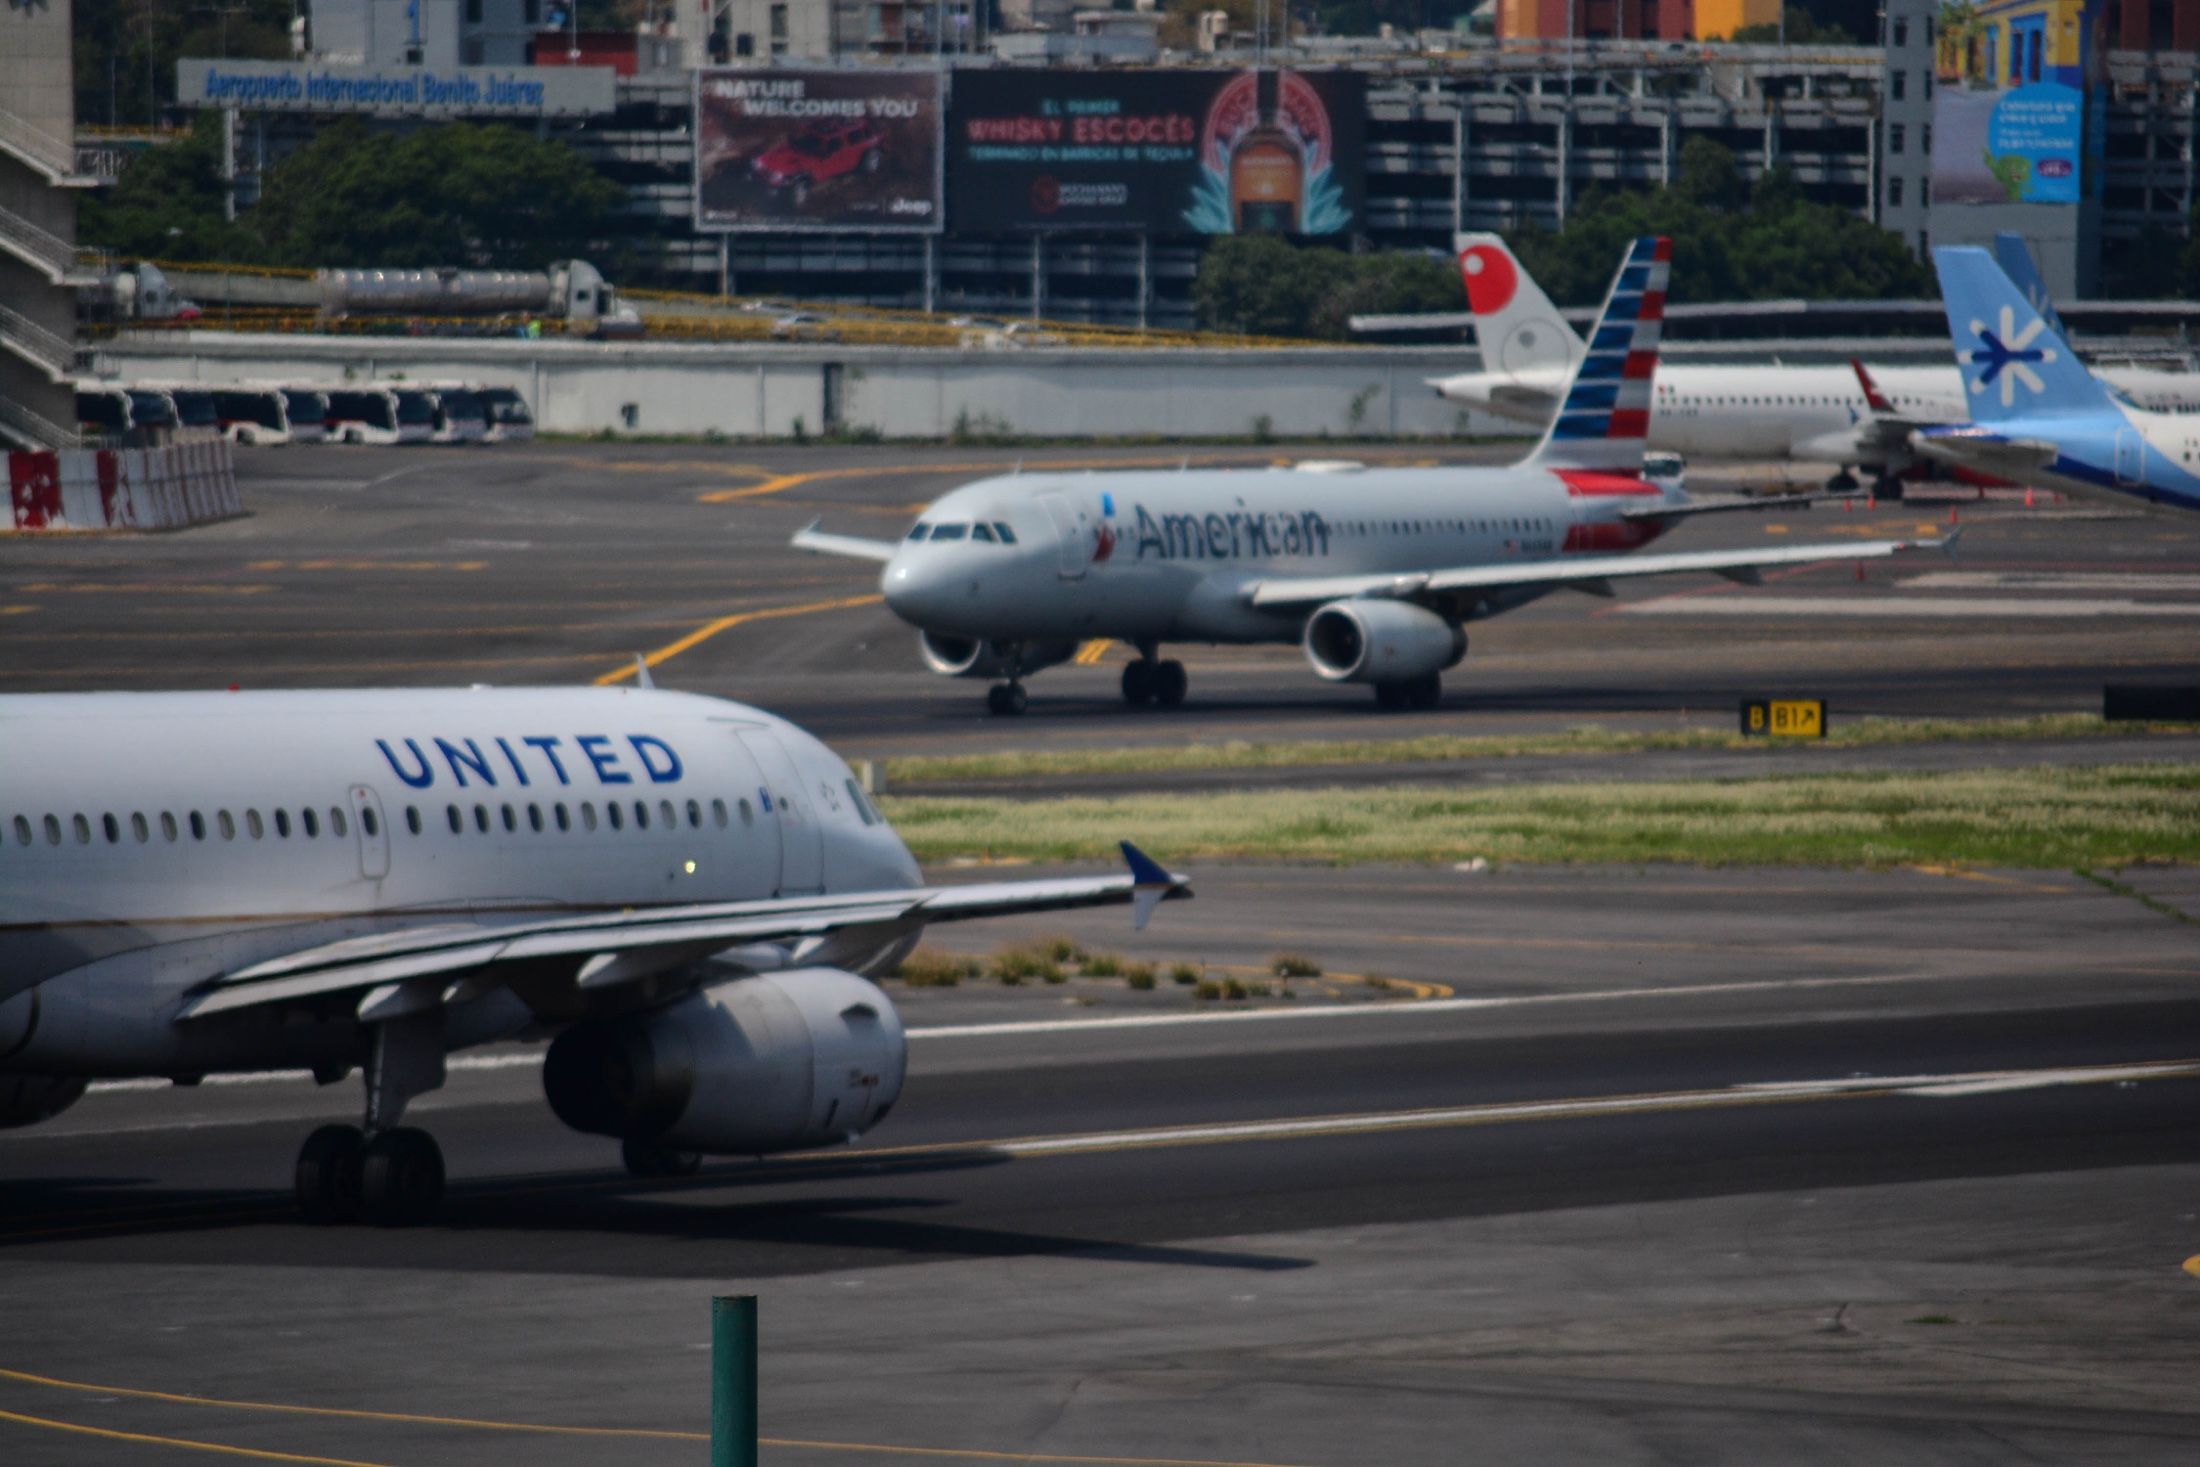 United and American Airlines aircraft on an airport apron.